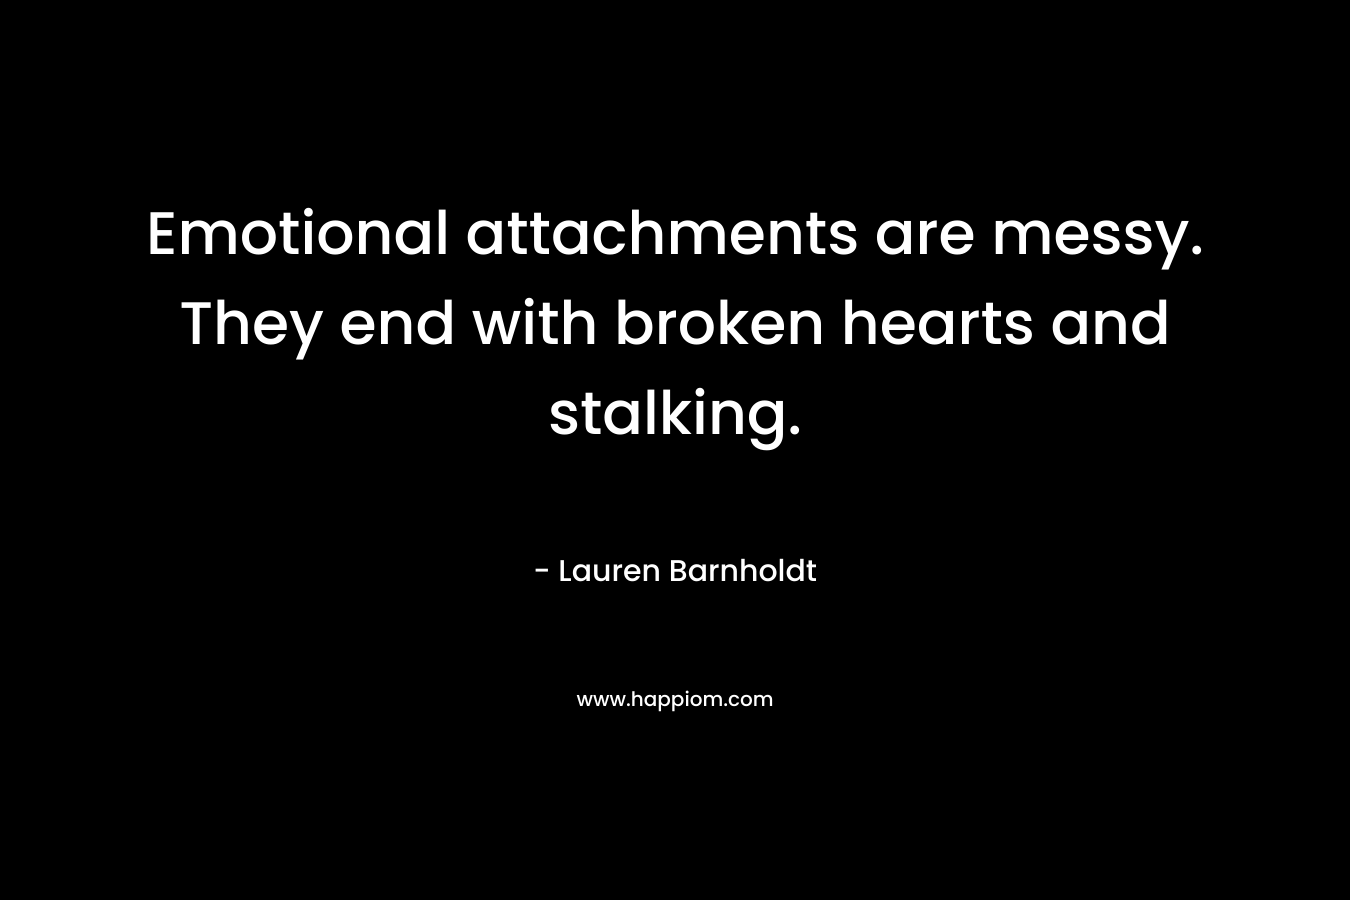 Emotional attachments are messy. They end with broken hearts and stalking.